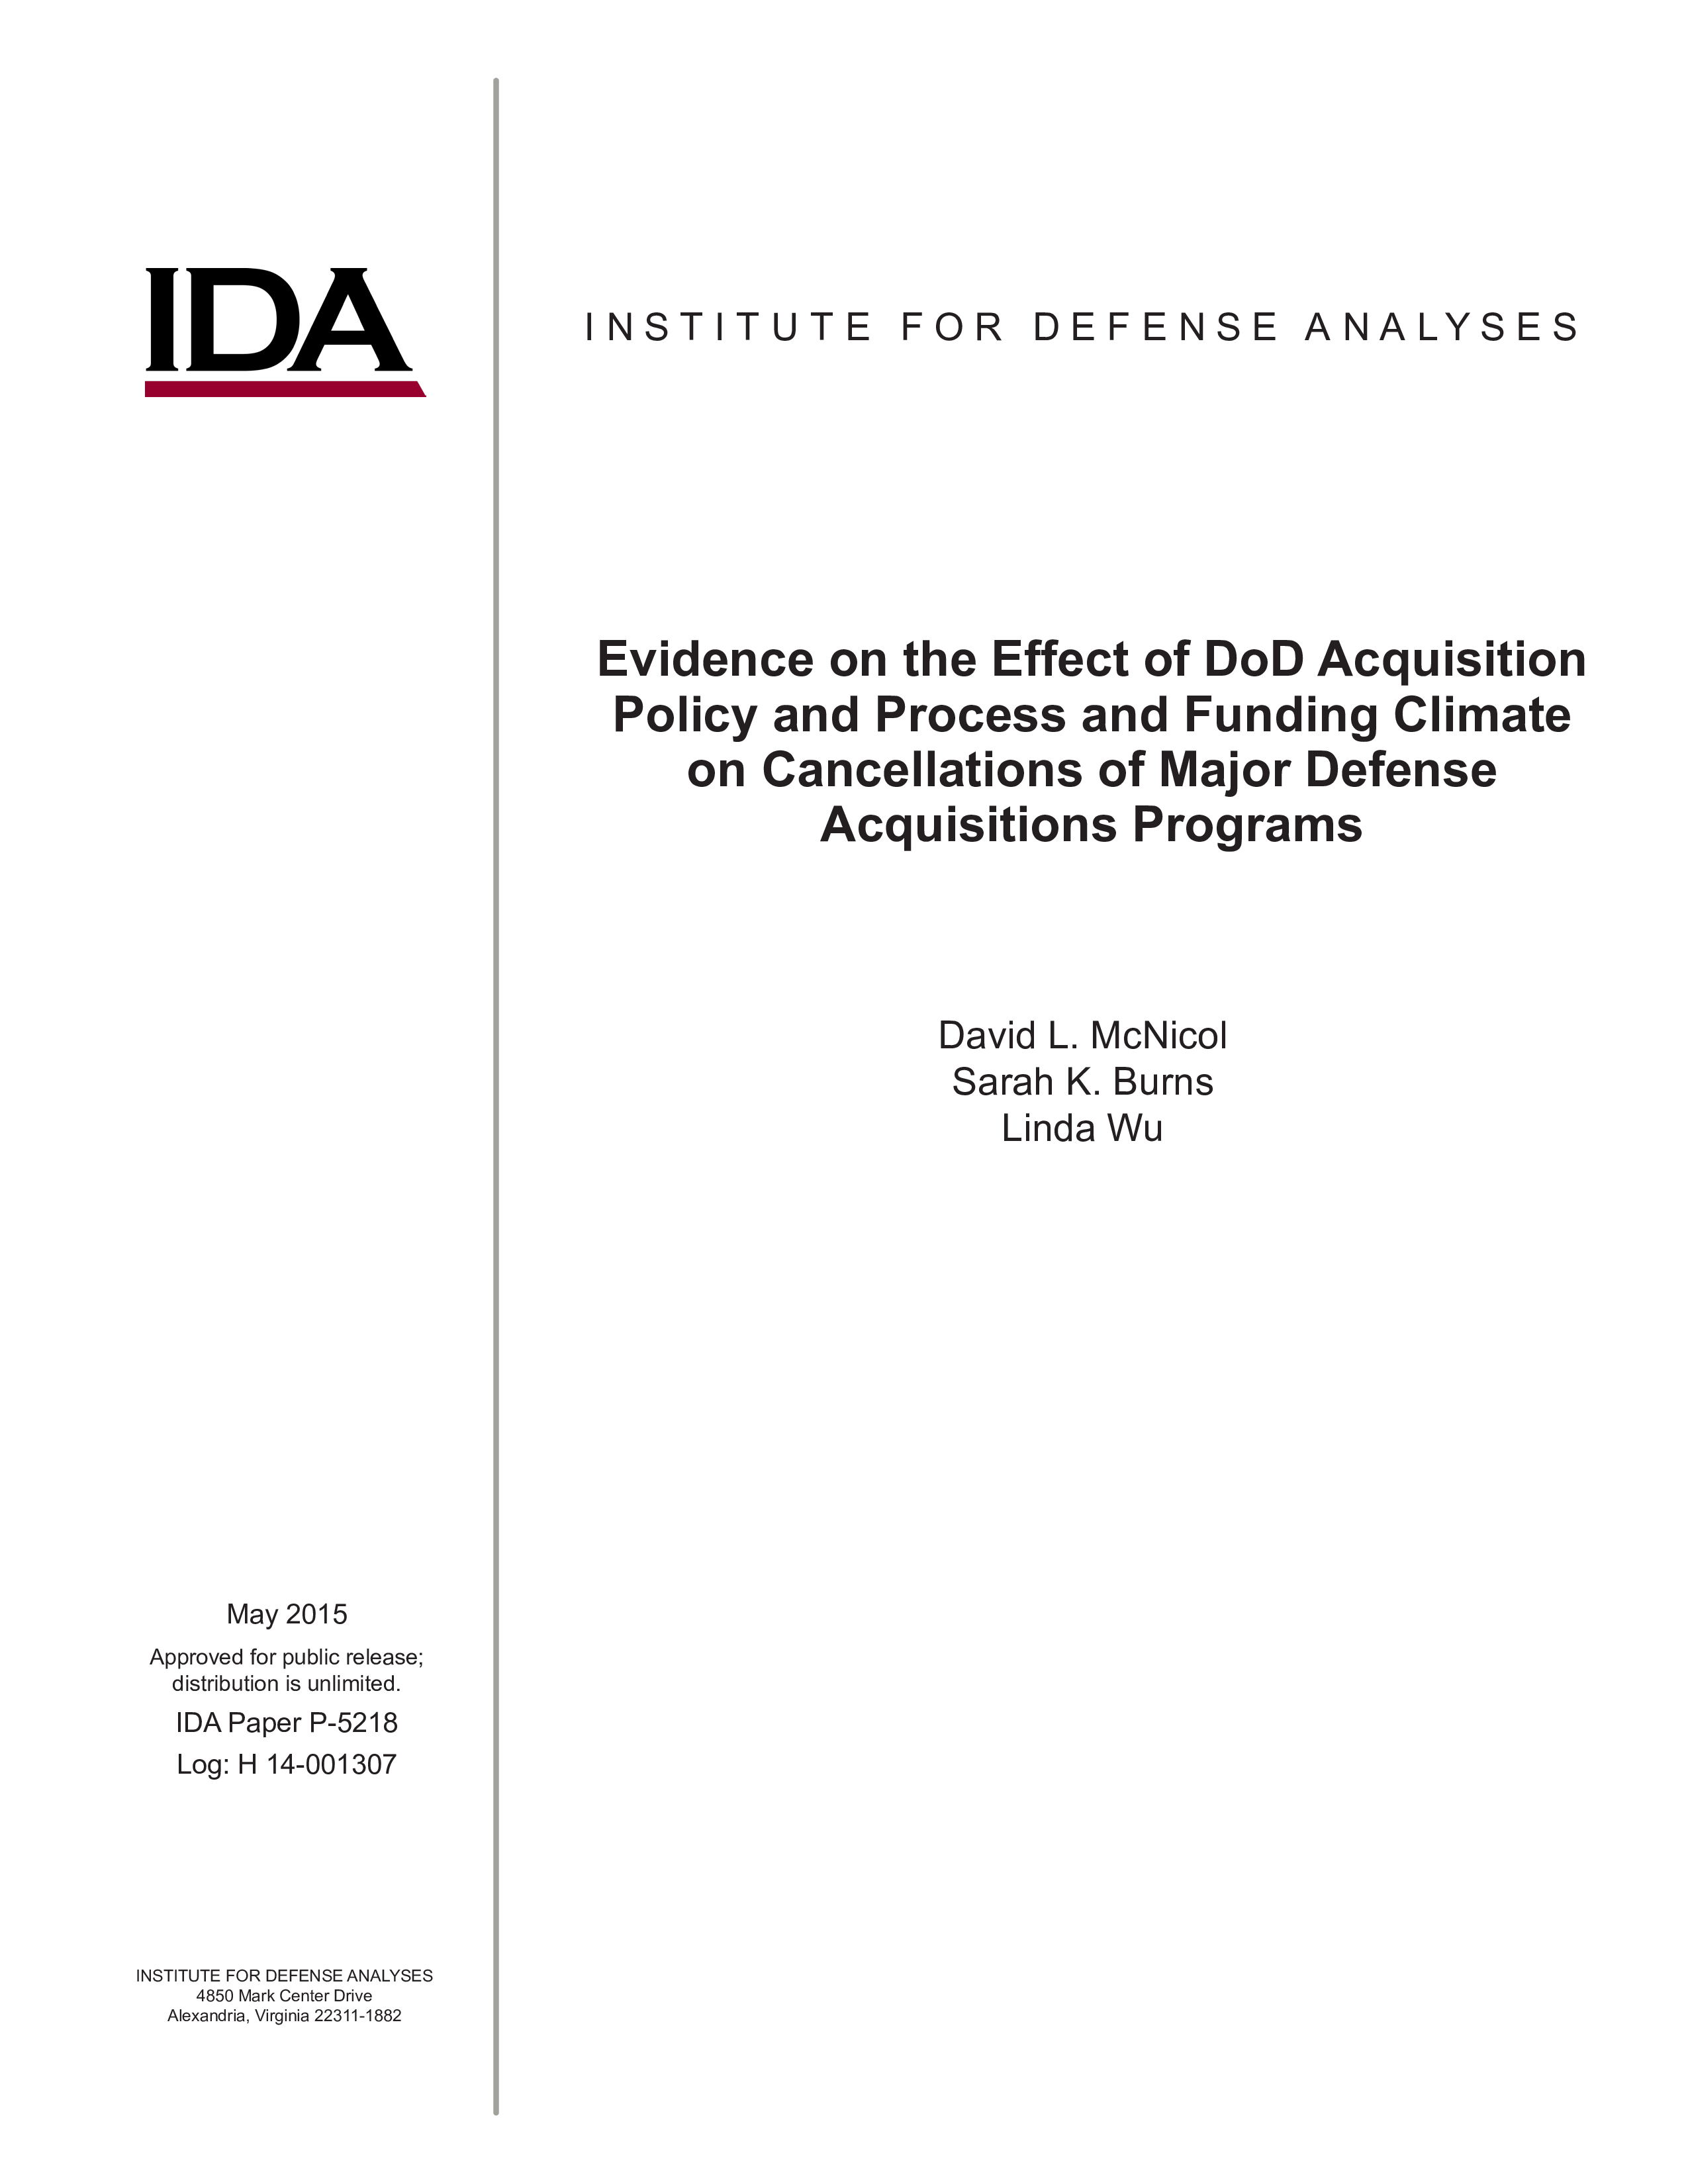 Evidence on the Effect of DoD Acquisition Policy and Process and Funding Climate on Cancellations of Major Defense Acquisitions Programs 